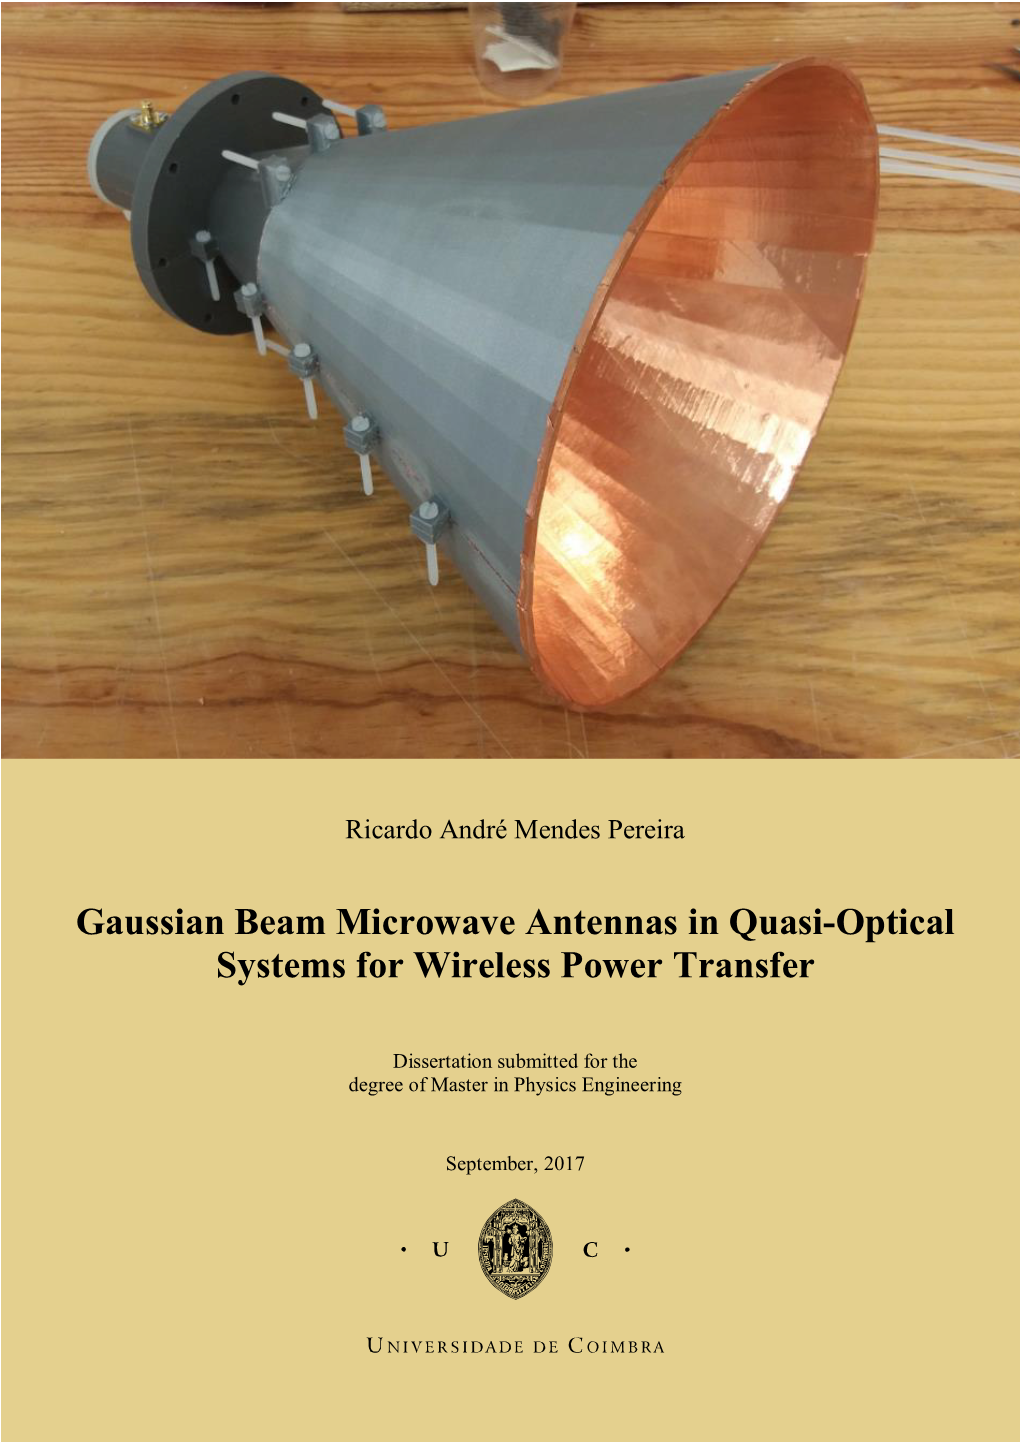 Gaussian Beam Microwave Antennas in Quasi-Optical Systems for Wireless Power Transfer